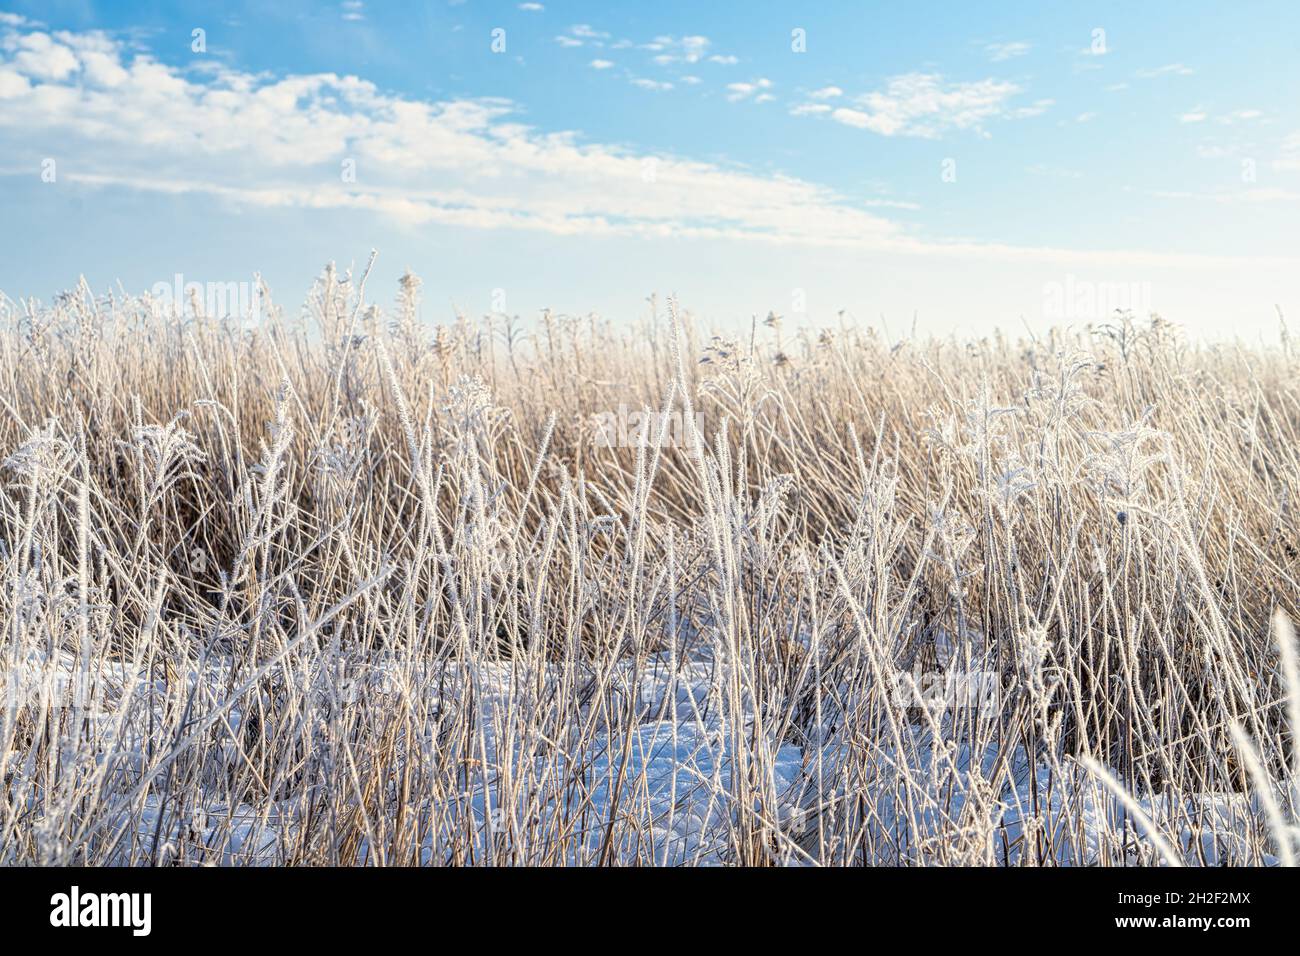 Weeds and grassed covered in hoar frost. Stock Photo